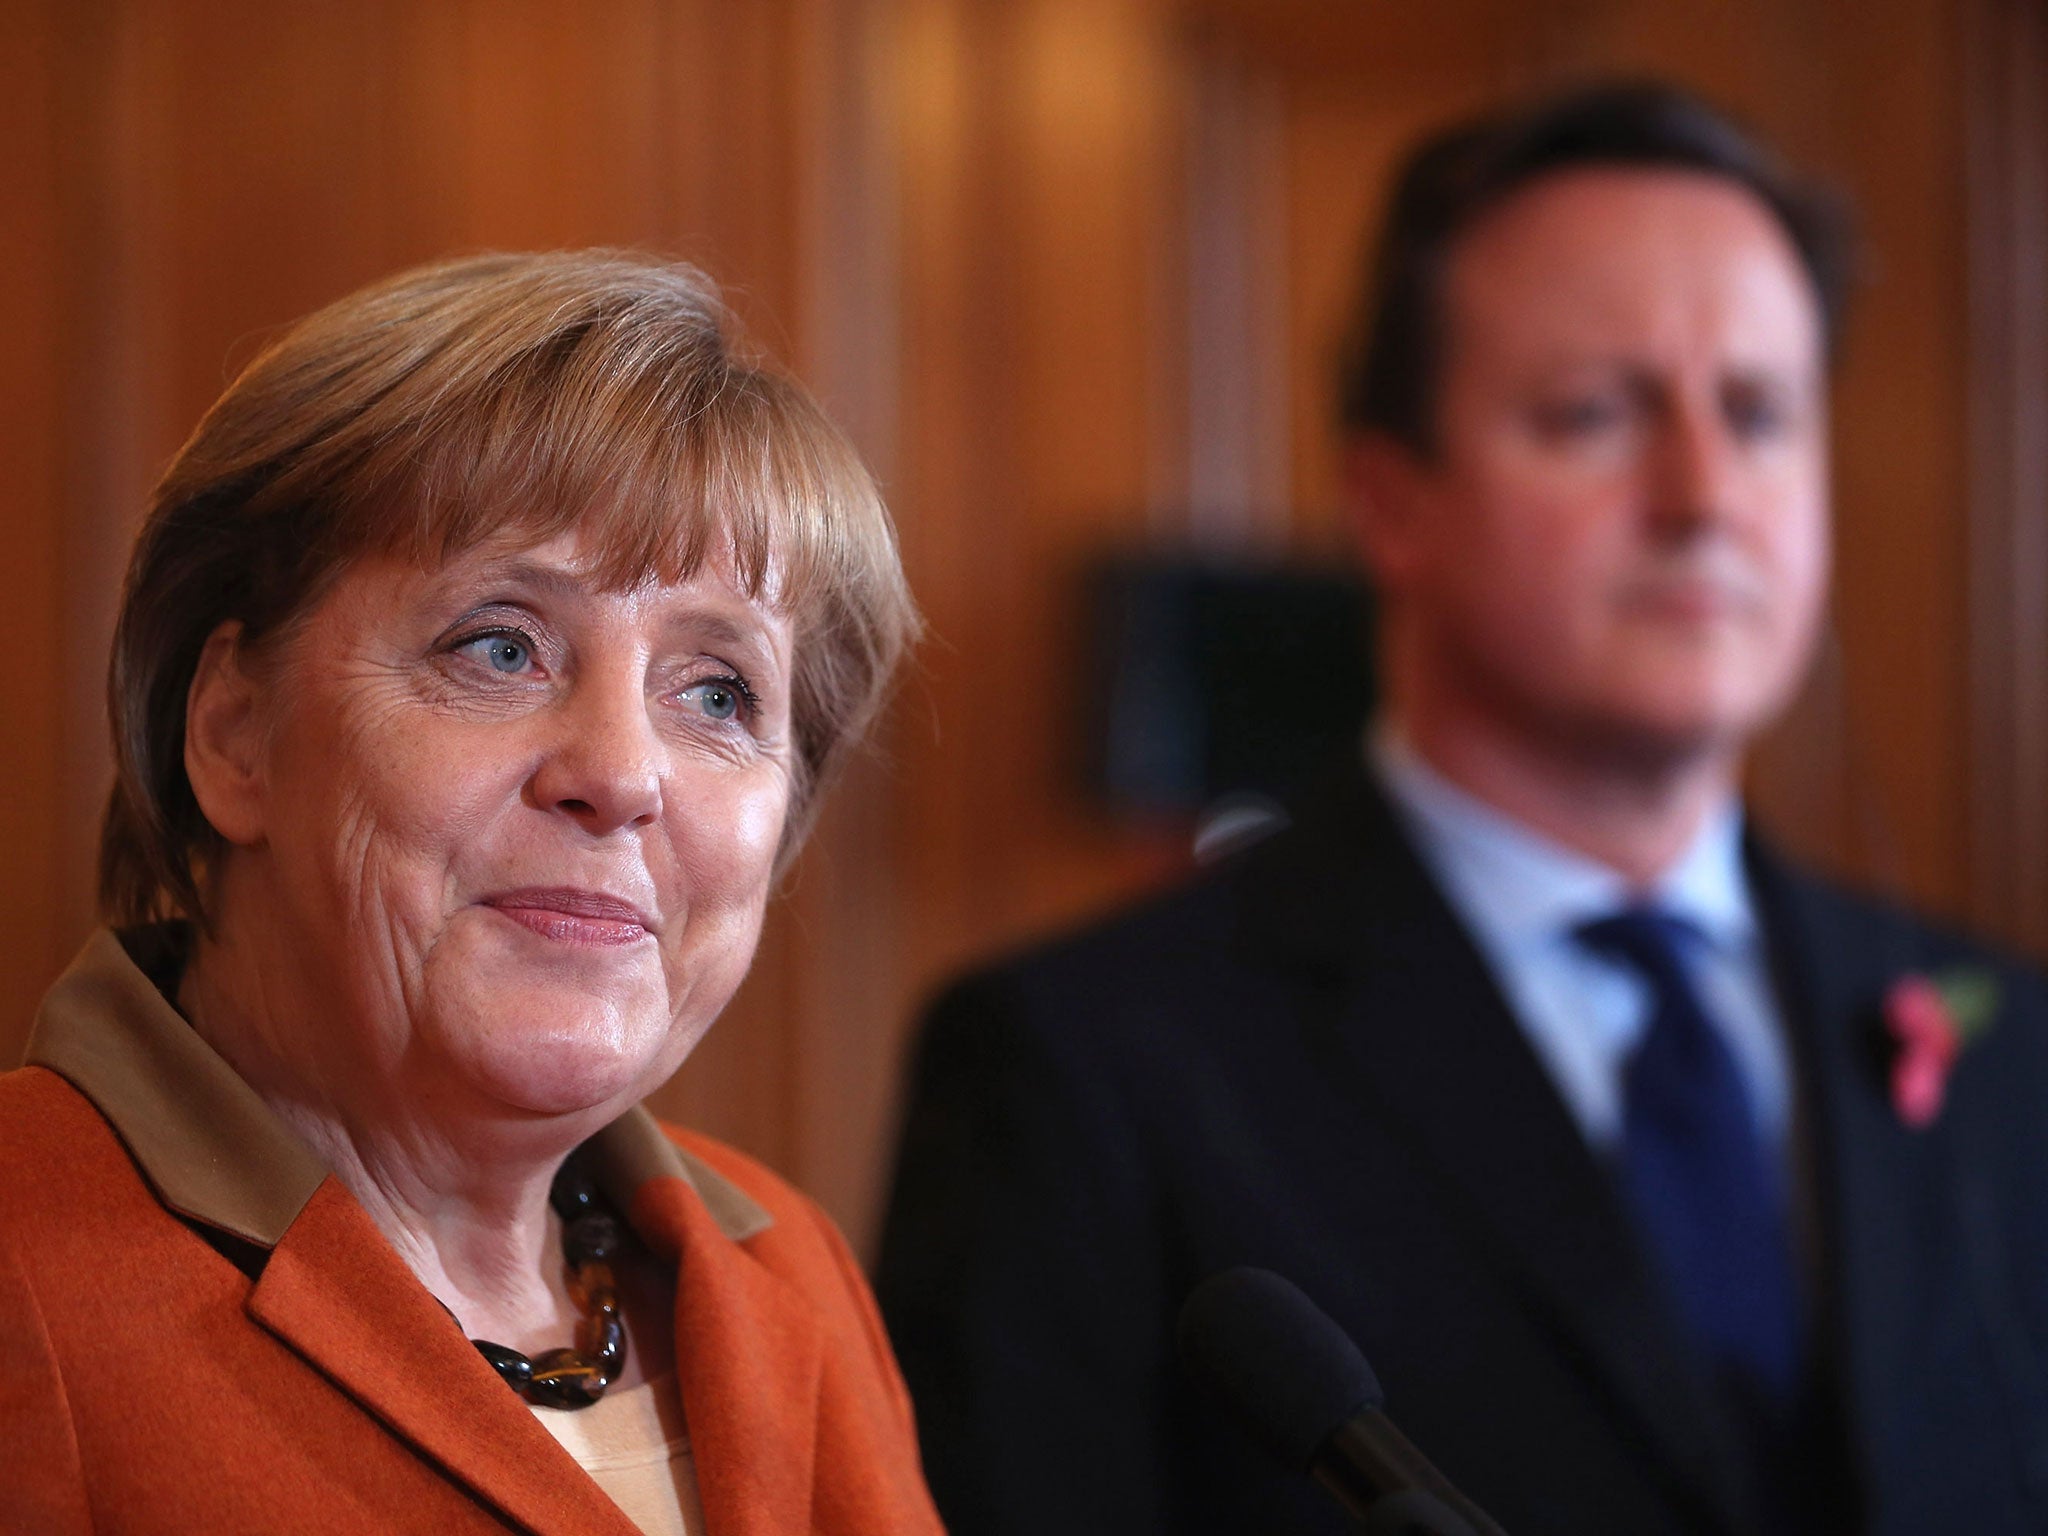 David Cameron will tell the German Chancellor Angela Merkel this week that he cannot back Britain’s continued membership of the EU unless she helps him secure an agreement that would allow the Government to restrict migrant welfare benefits